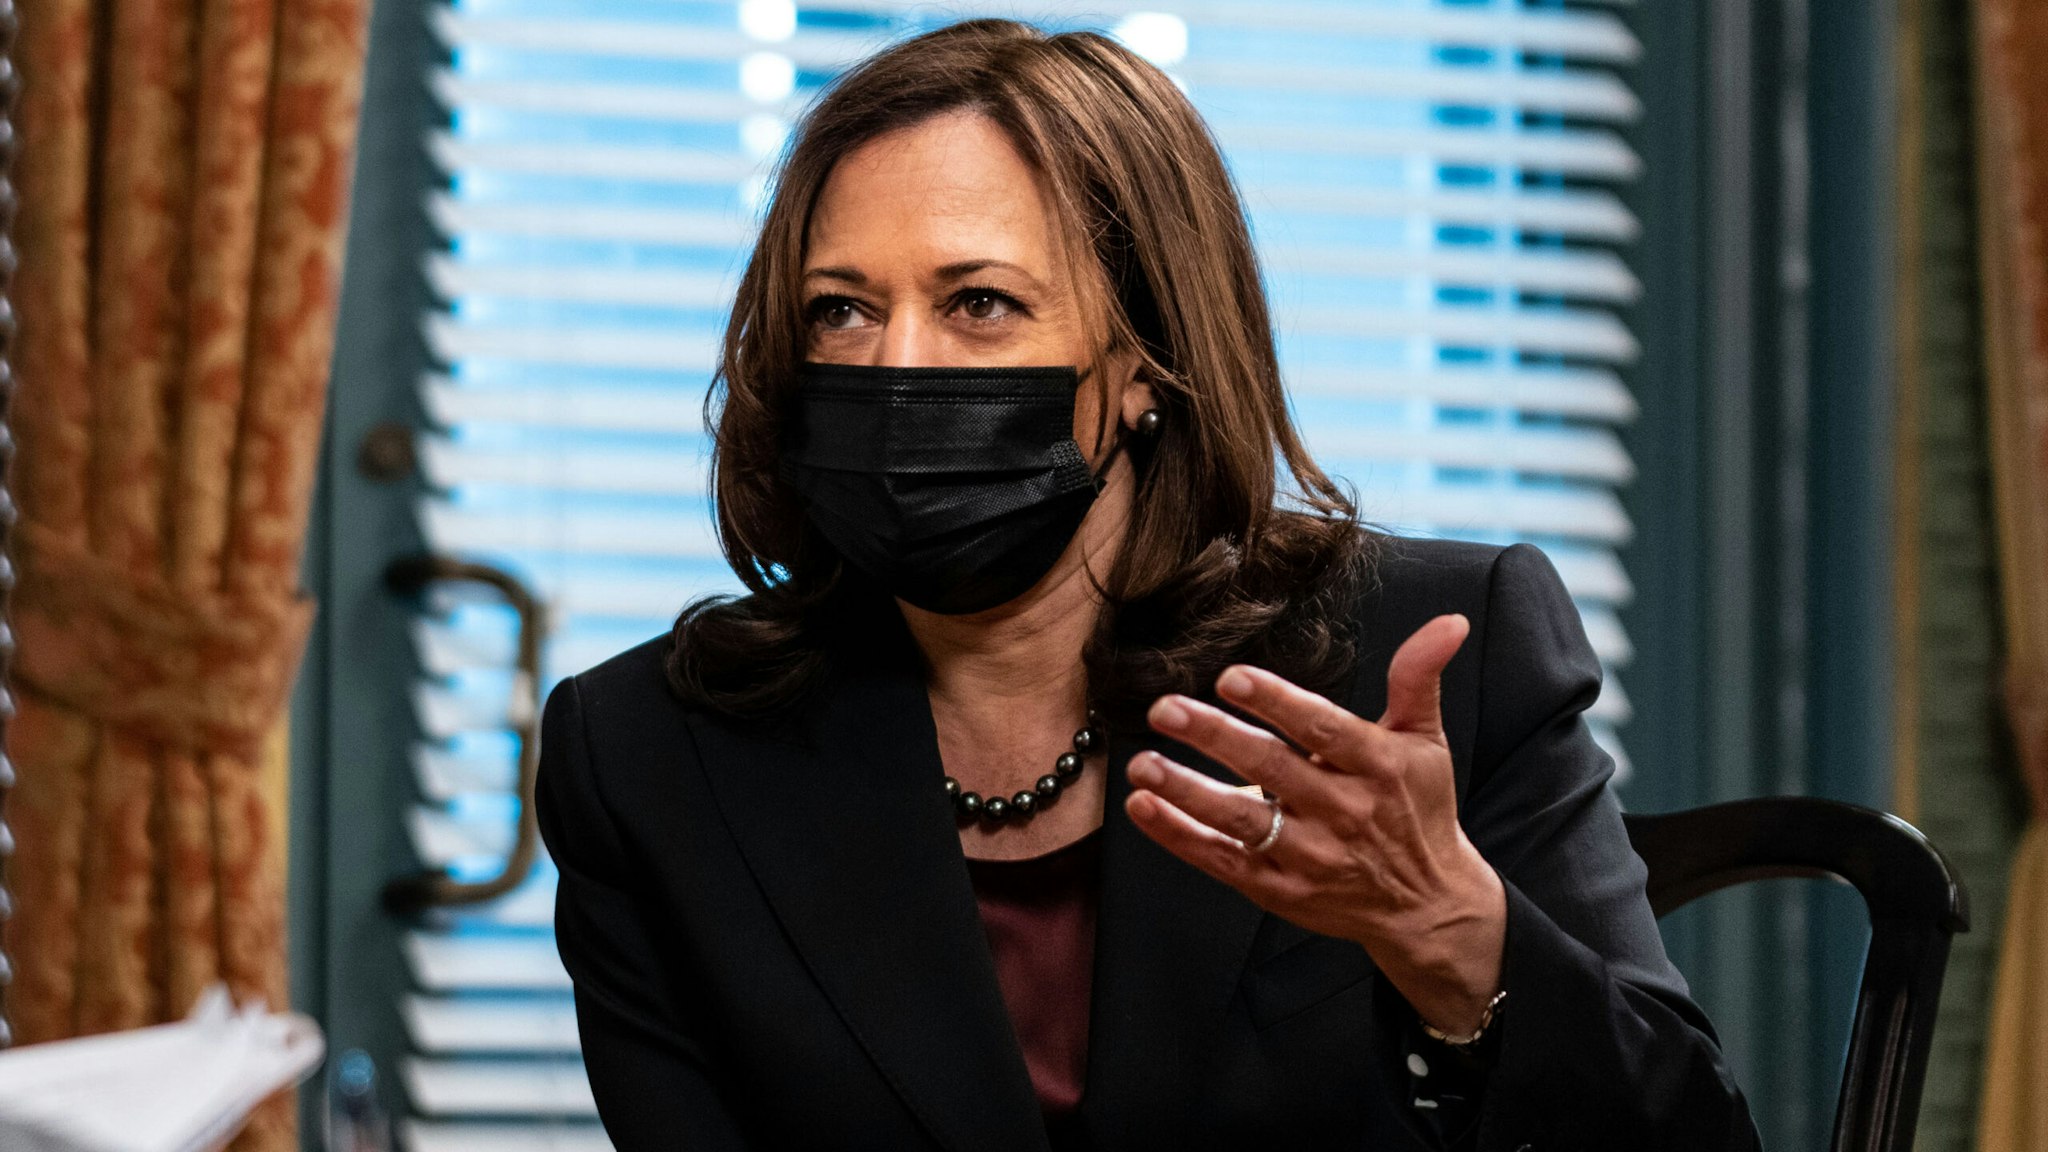 WASHINGTON, DC - DECEMBER 17: Vice President Kamala Harris speaks during an interview with The Los Angeles Times in her ceremonial office in the Eisenhower Executive Office Building on the White House Complex on Friday, Dec. 17, 2021 in Washington, DC.